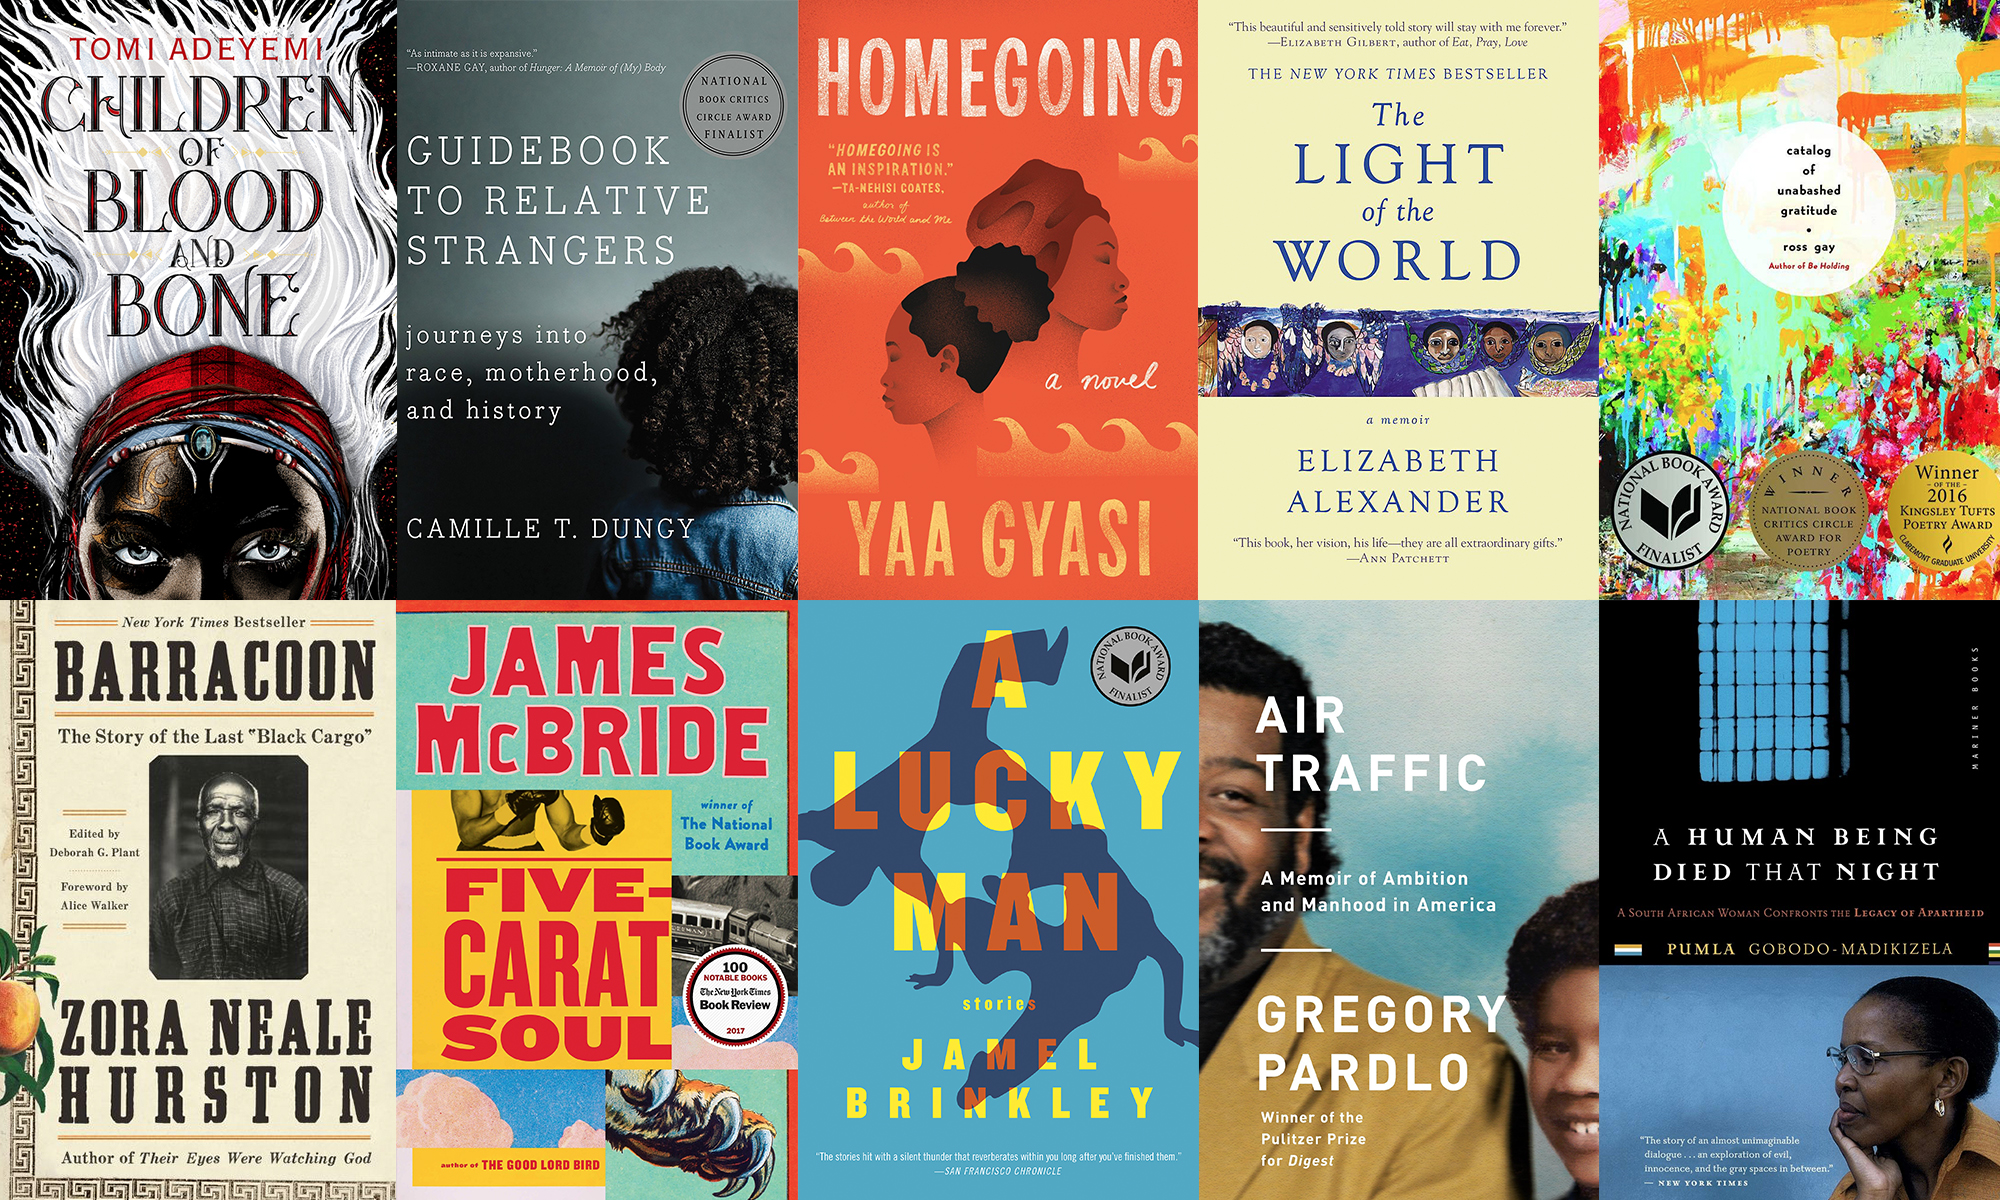 62 great books by Black authors, recommended by TED speakers |